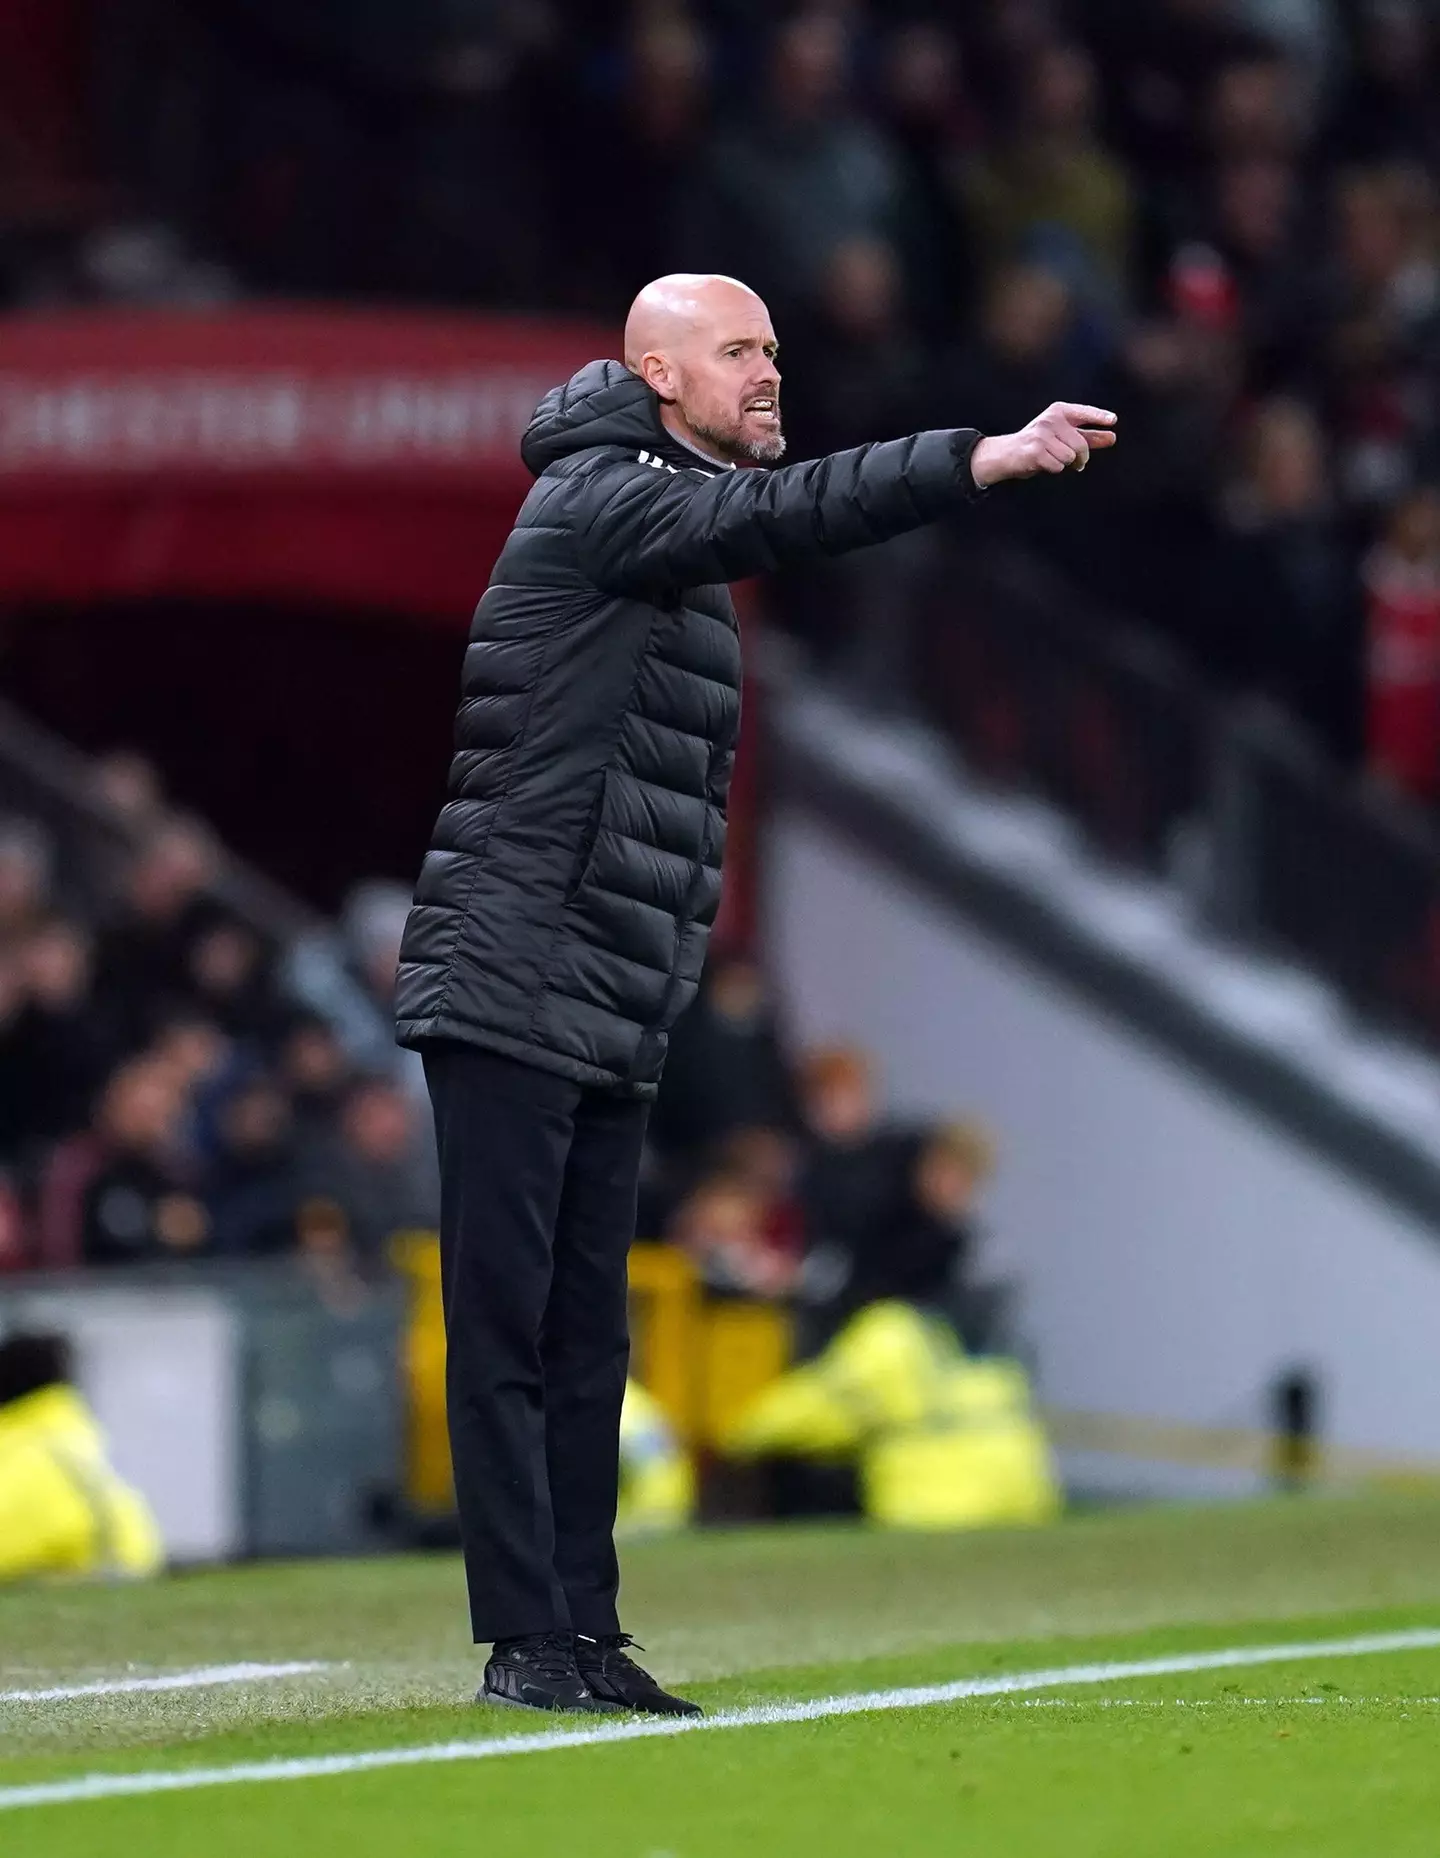 Manchester United manager Erik ten Hag on the touchline during the Premier League match at Old Trafford. (Alamy)